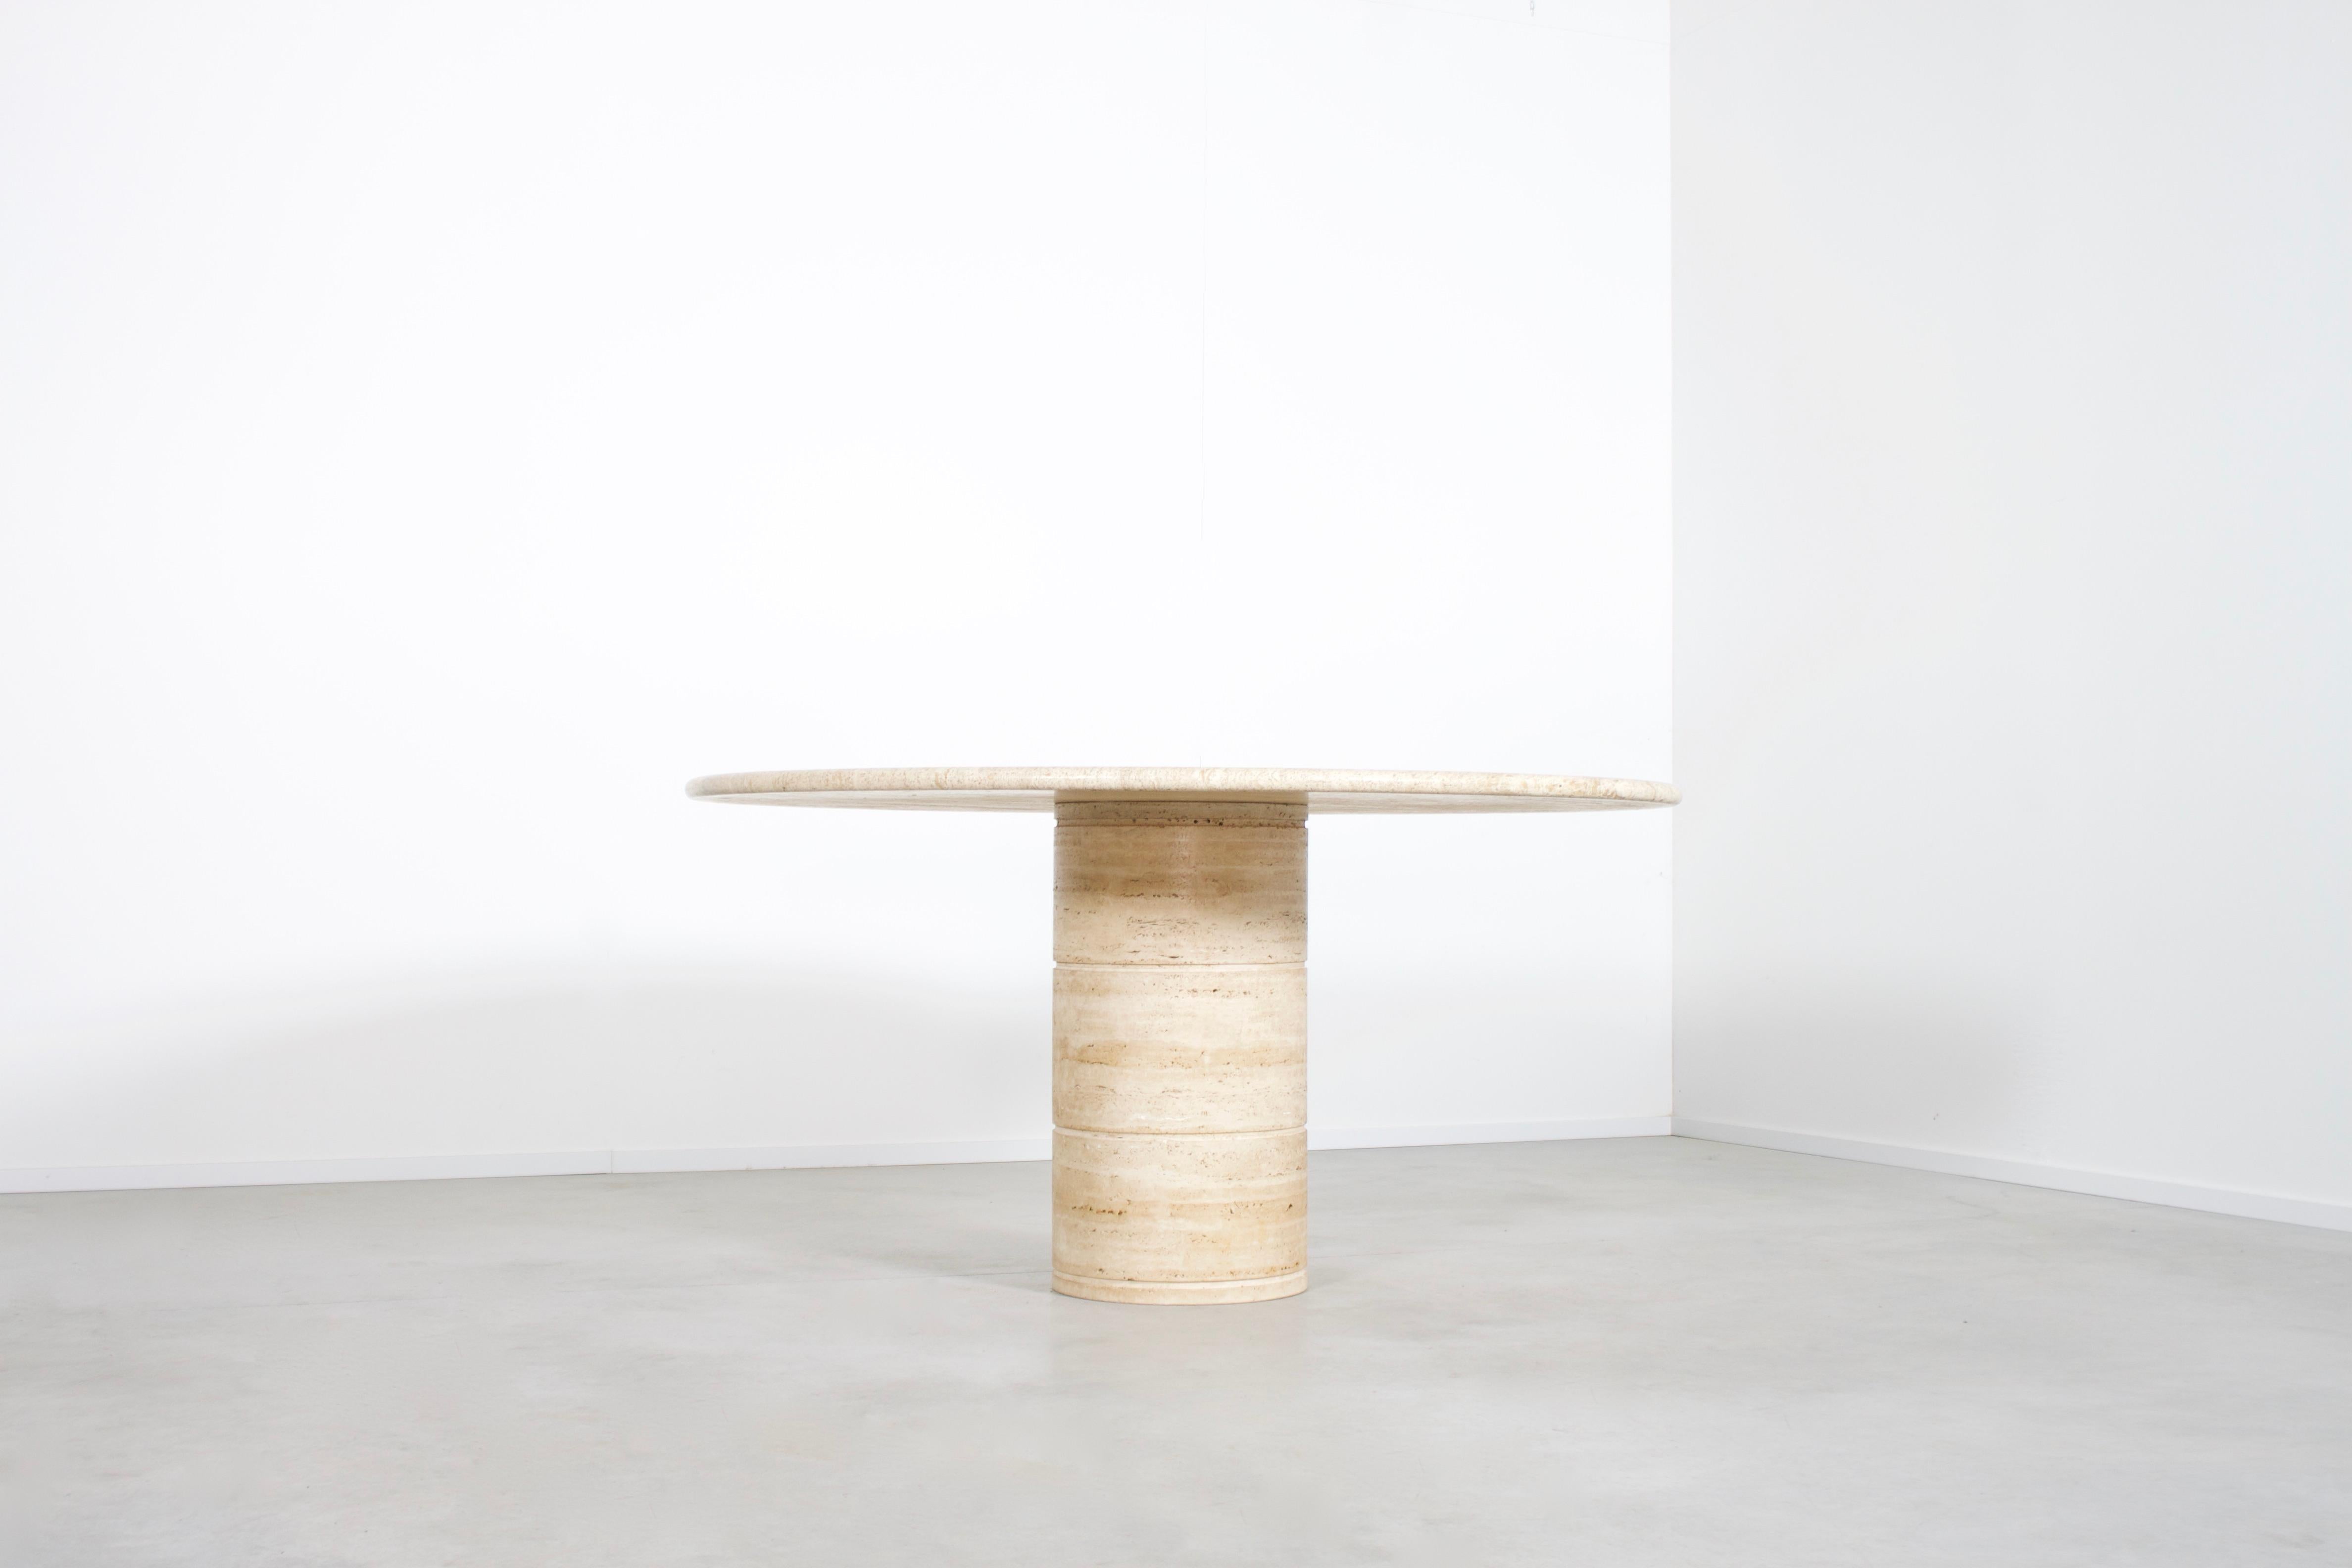 High quality Italian travertine marble table in very good condition.

Issued by Up & Up Italy in the 1970s

Thick travertine top in variegated tones of beige and brown. 

The top rests on a round pedestal base also made of travertine. 

The top